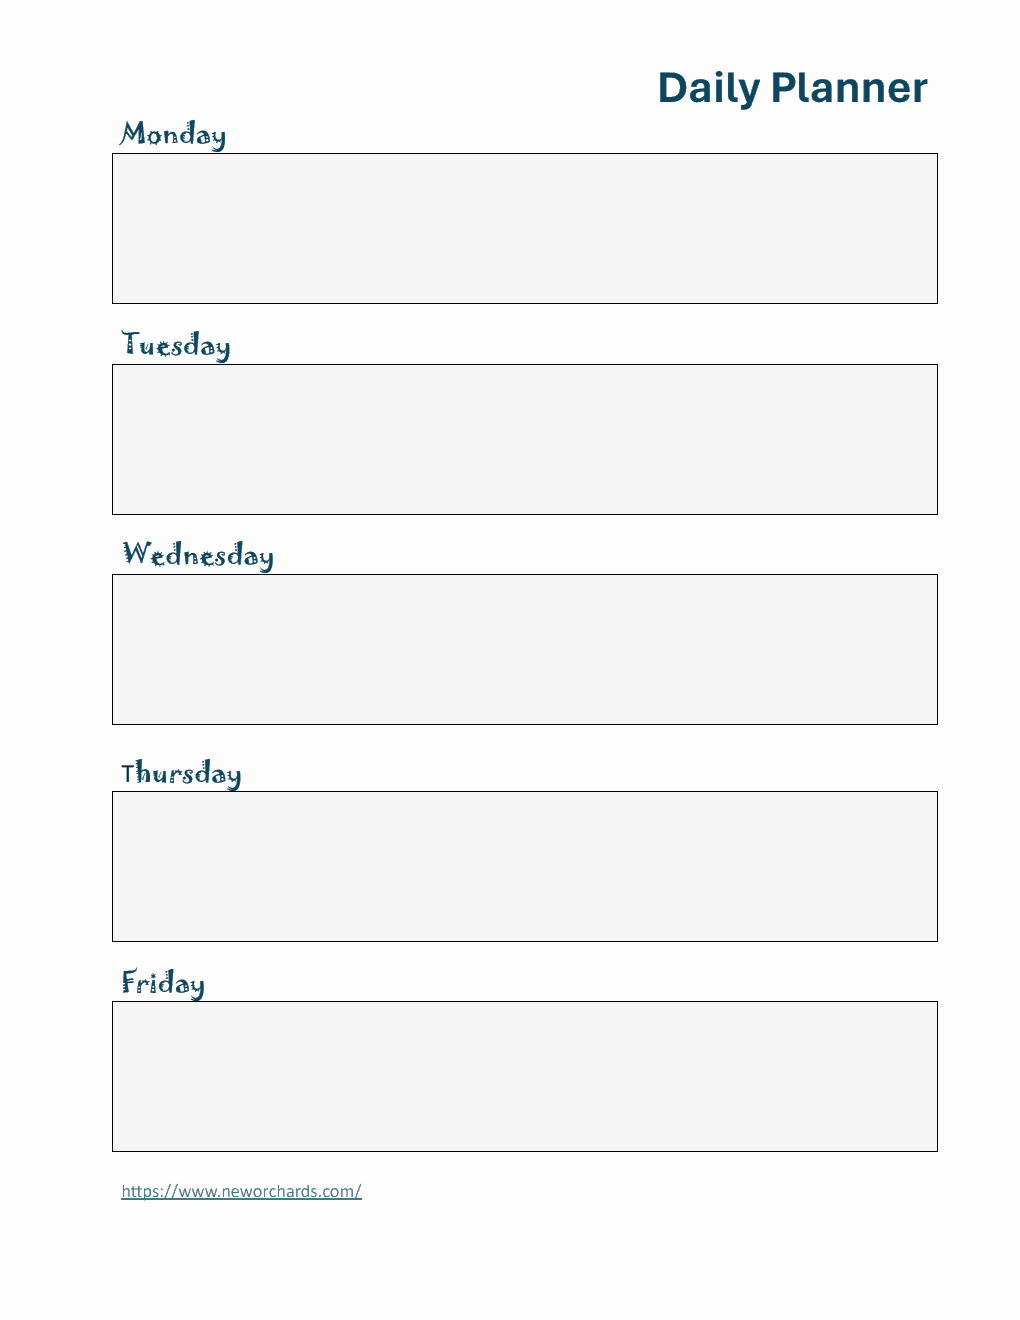 Daily Planner Template Printable in PDF